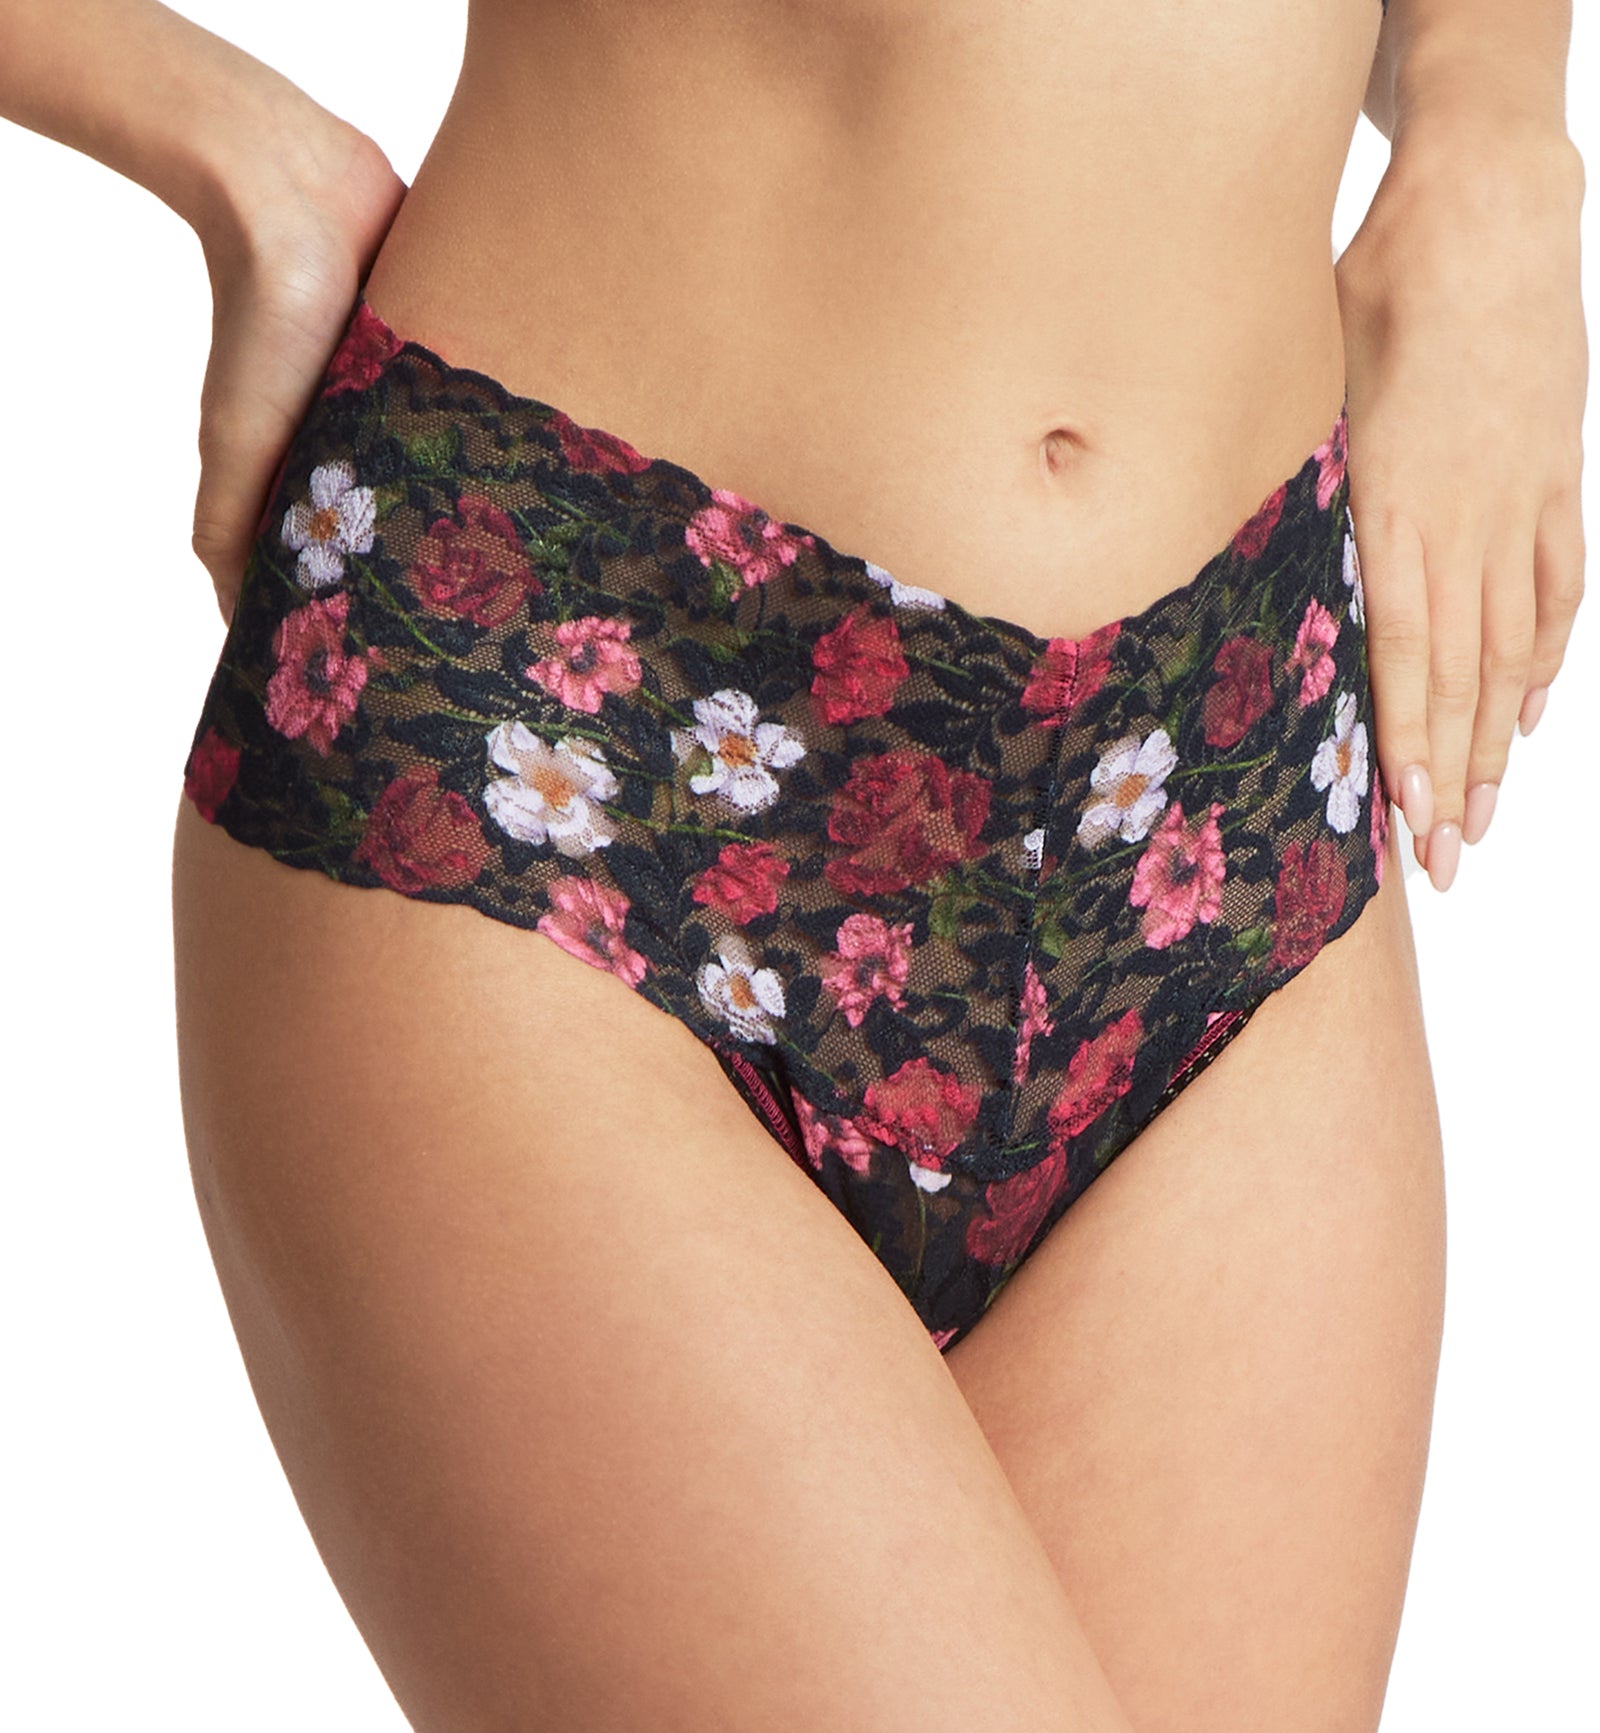 Hanky Panky High-Waist Retro Lace Printed Thong (PR9K1926),Am I Dreaming - Am I Dreaming,One Size